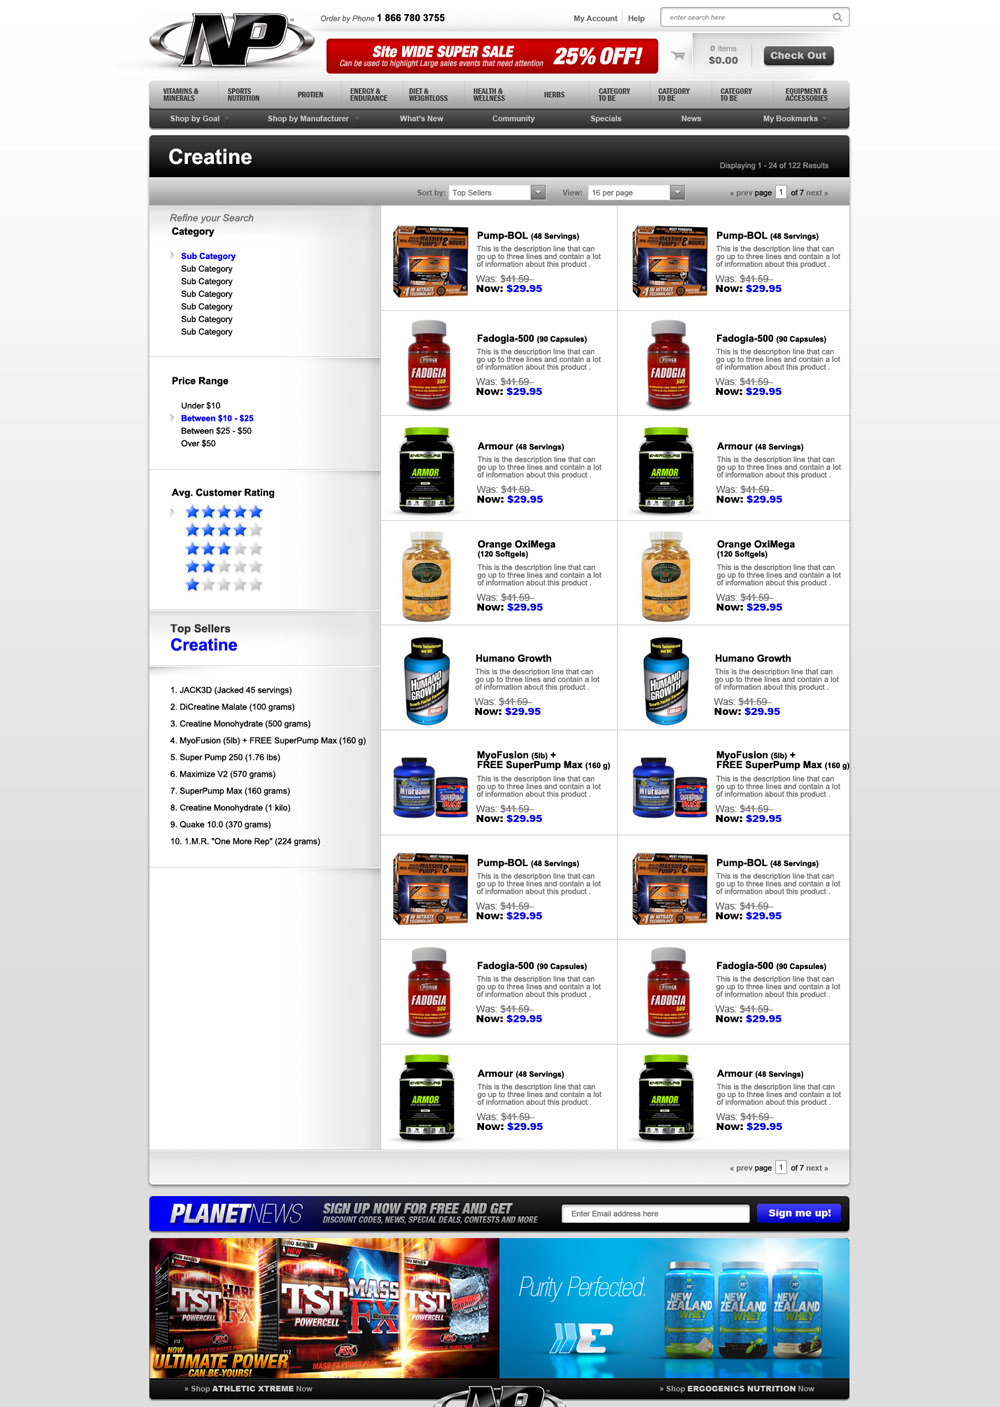 Nutraplanet  ecommerce  online store  supplements